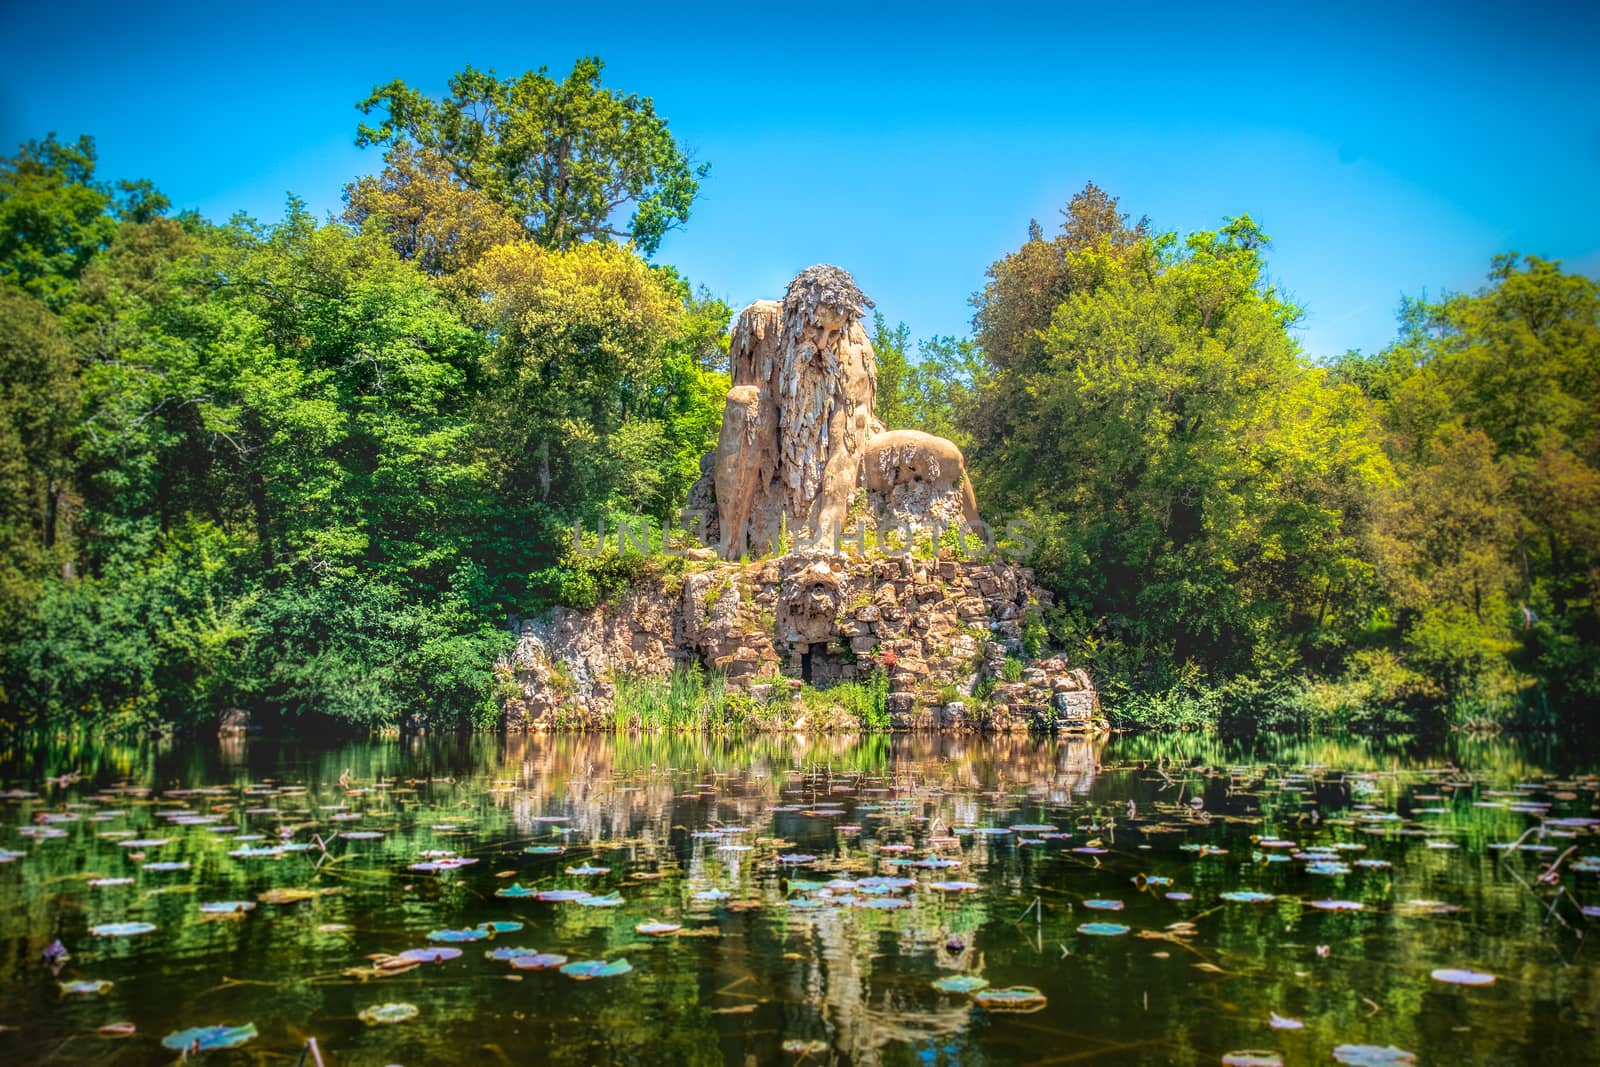 Villa Demidoff Pratolino park and the Colosso del Appennino colossus statue with pond full of waterlilies and leaves by LucaLorenzelli